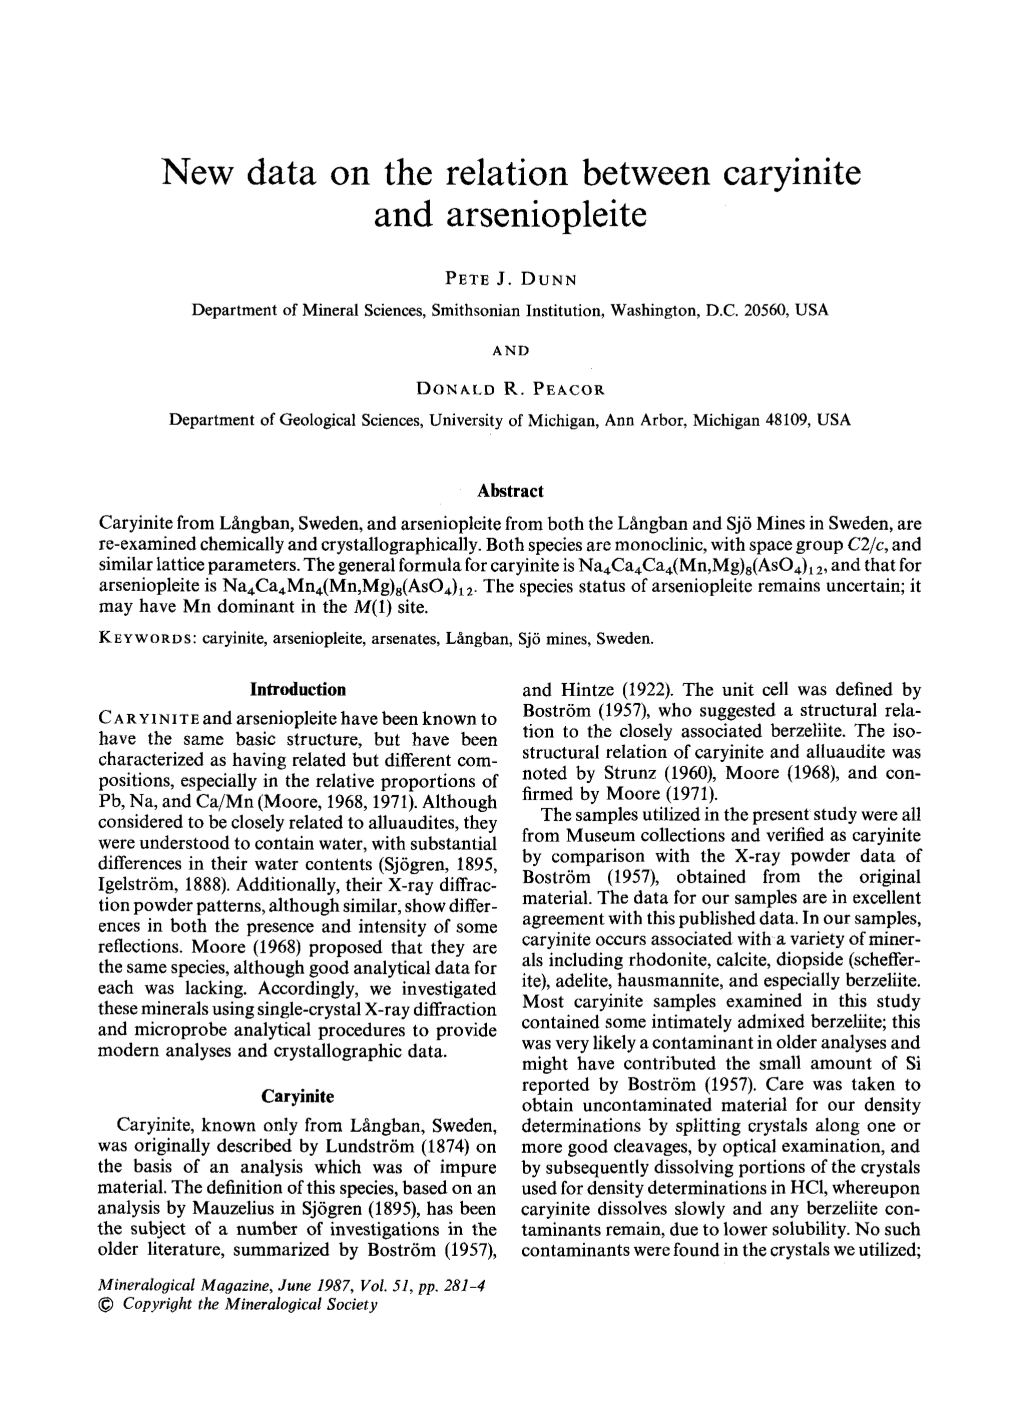 New Data on the Relation Between Caryinite and Arseniopleite